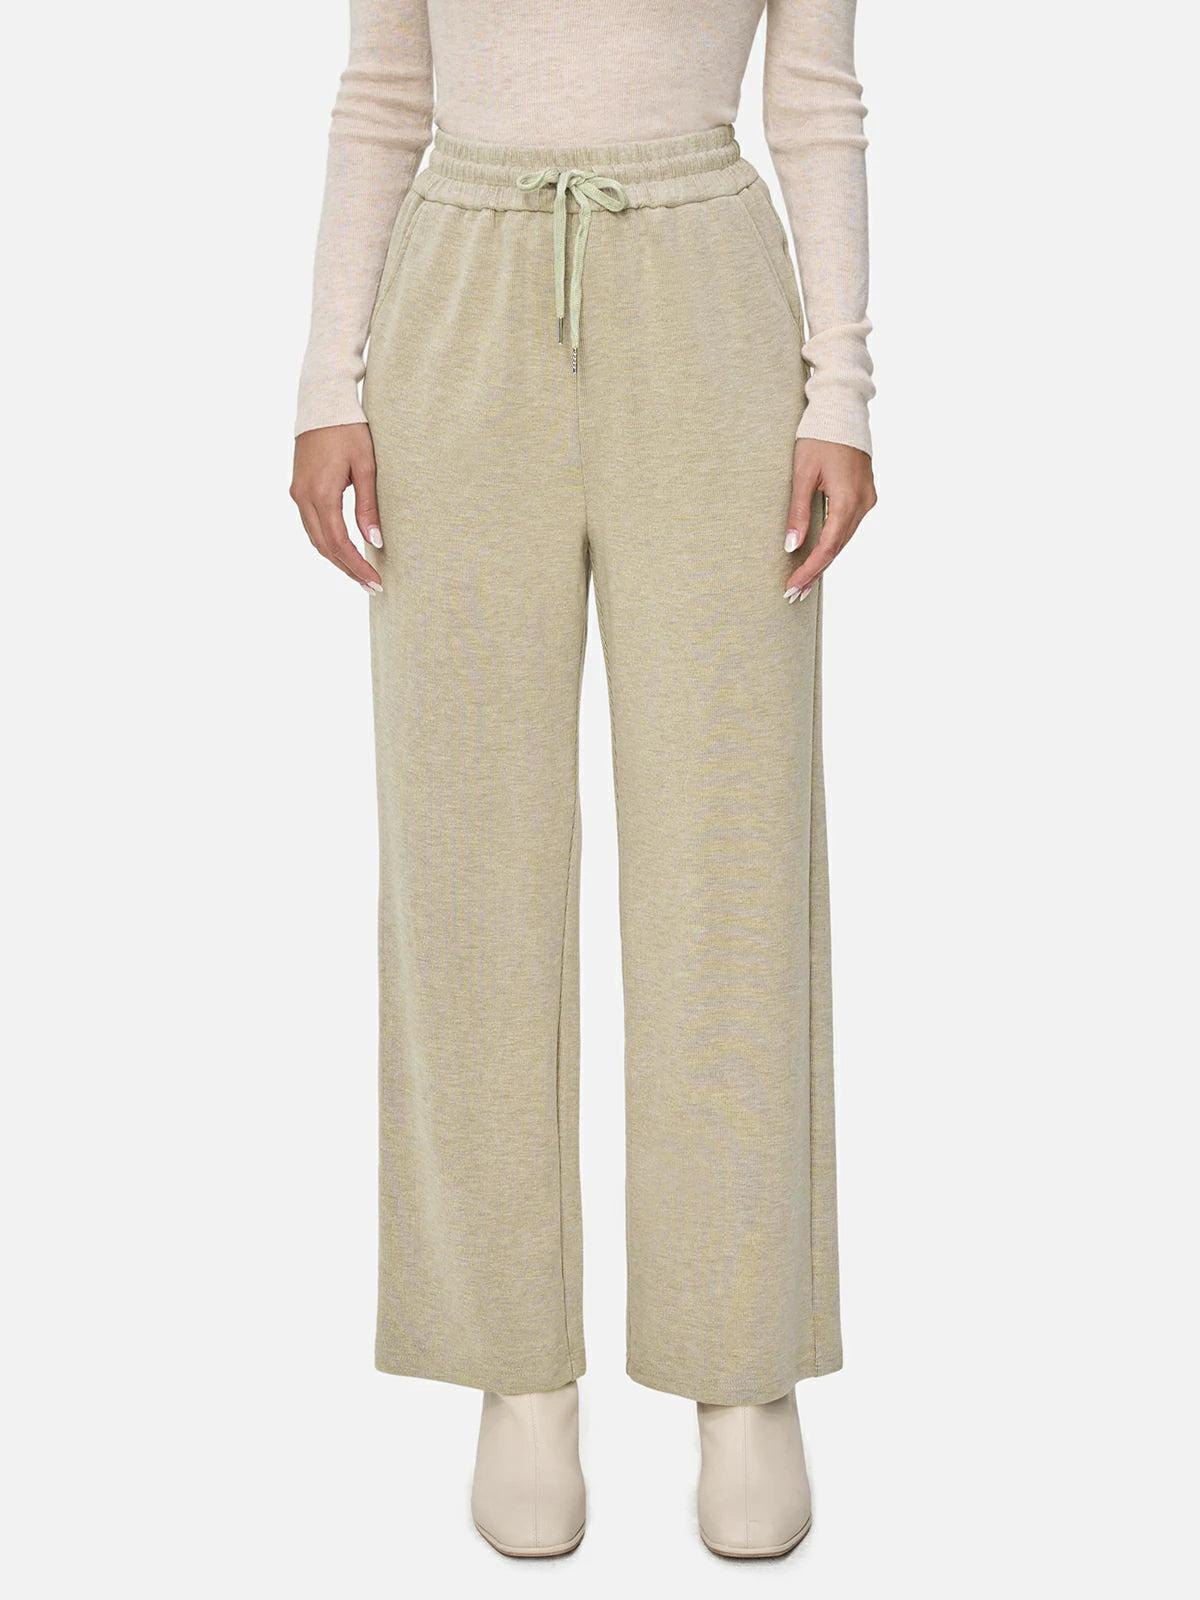 Versatile Knit Pants: Elevate your wardrobe with these versatile knitted straight-leg pants.